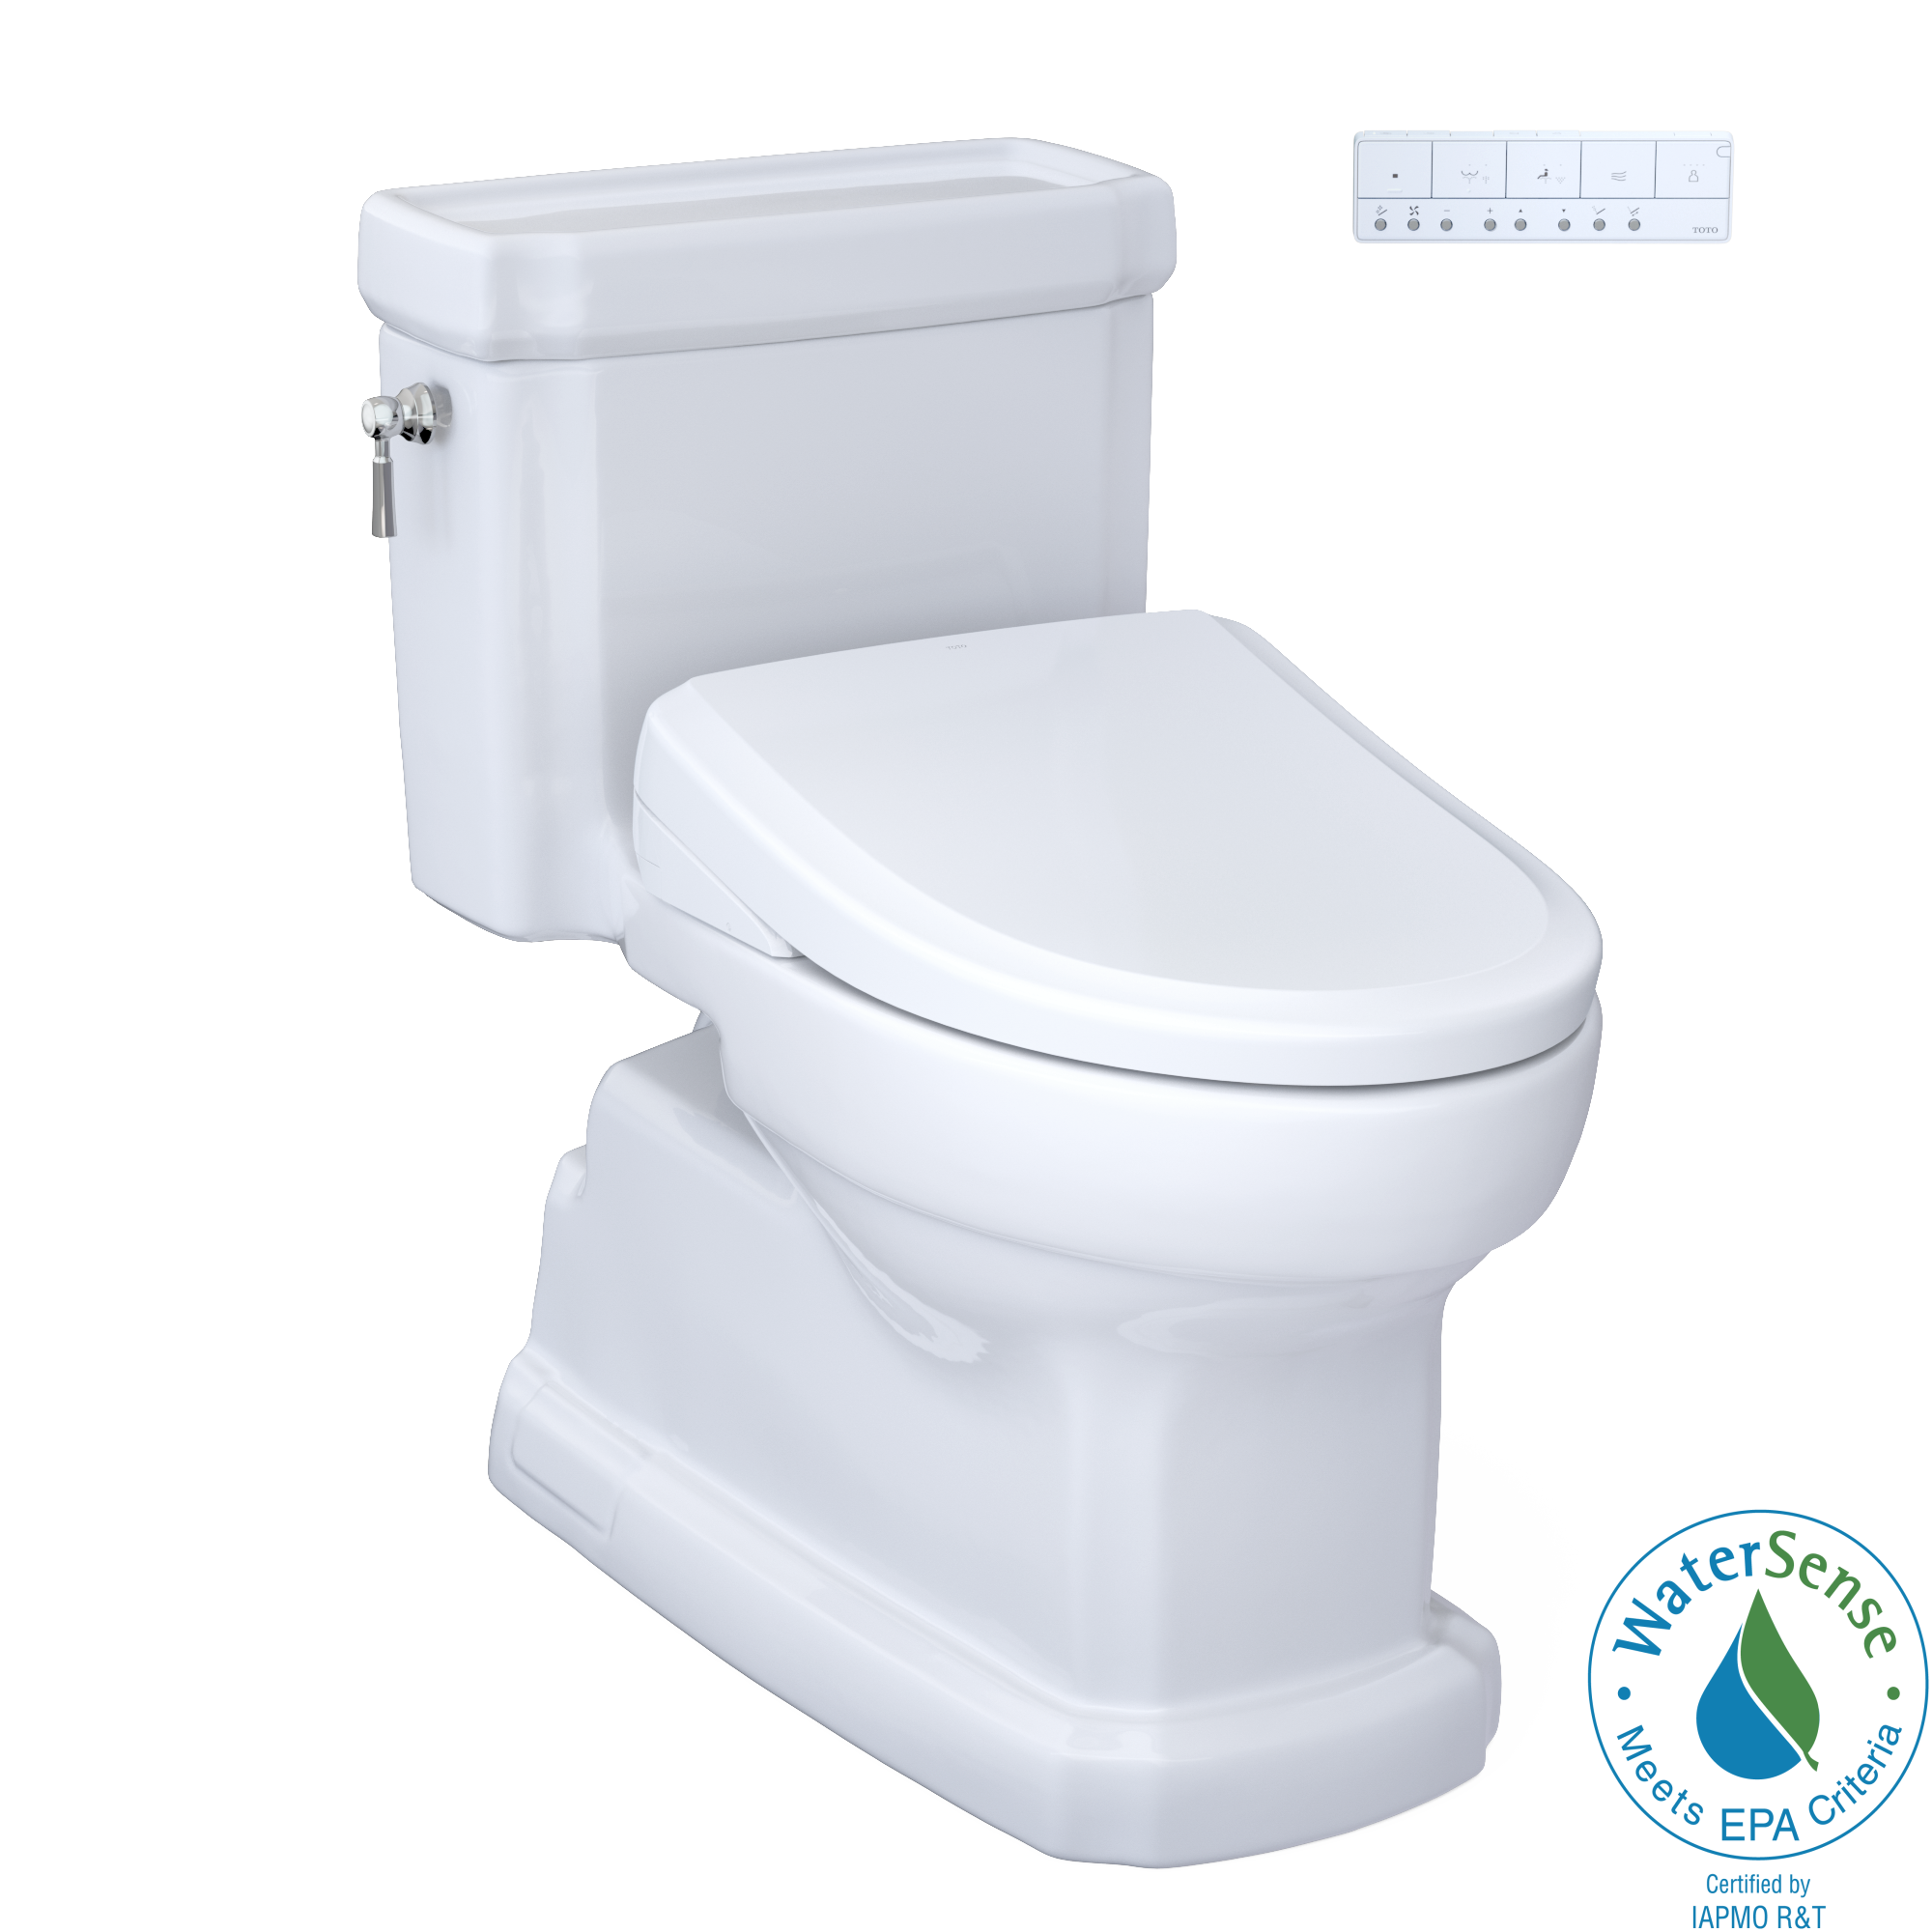 TOTO WASHLET+ Eco Guinevere Elongated 1.28 GPF Universal Height Toilet with S7A Classic Bidet Seat, Cotton White - MW9744734CEFG#01, MW9744734CEFGA#01